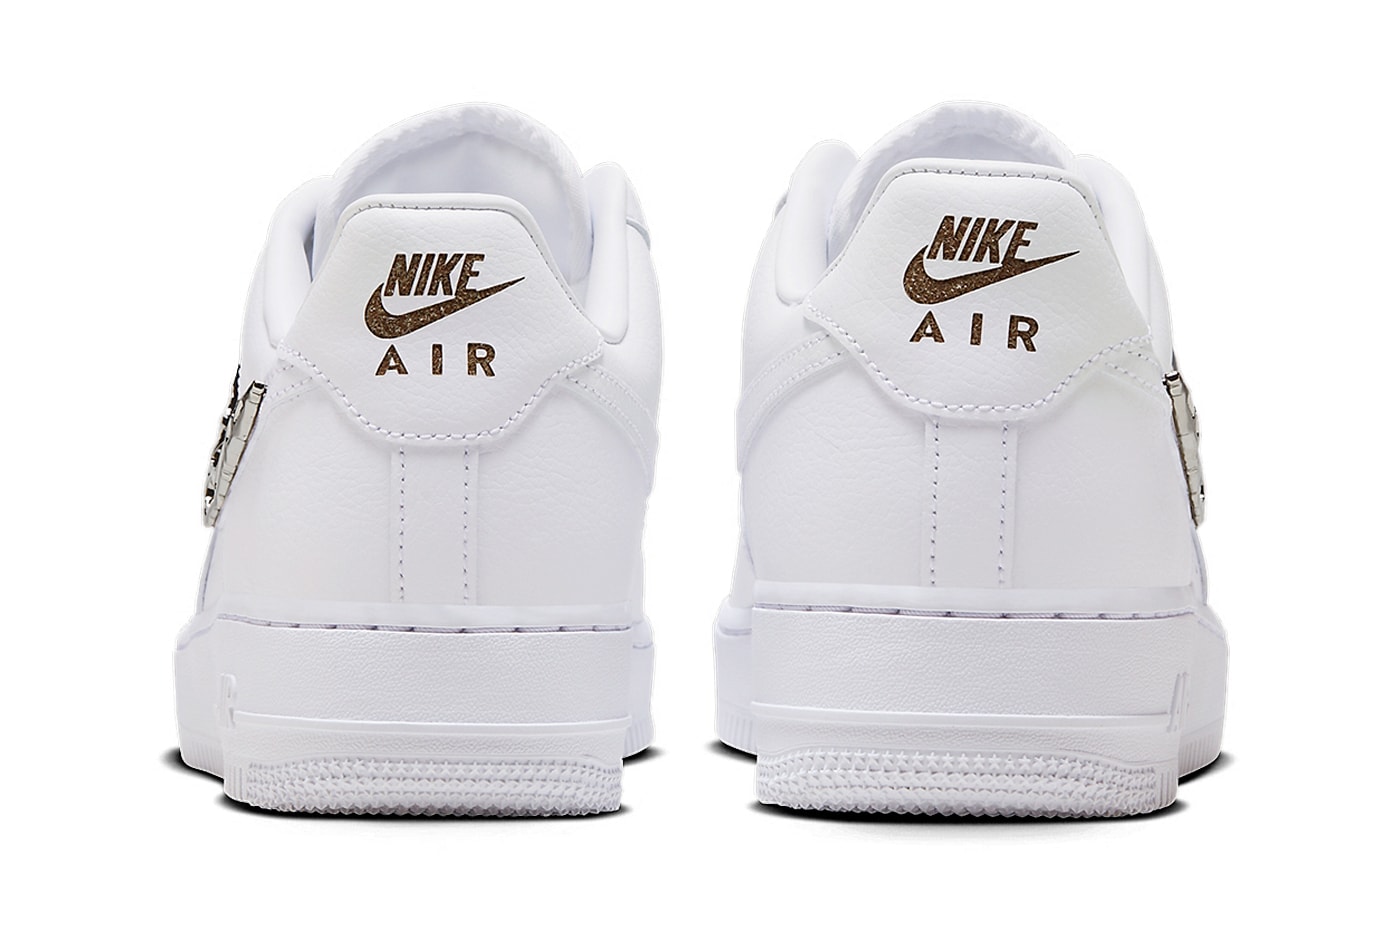 Nike Air Force 1 "Molten Metal" Is Adorned in Silver Details Release Info silver buckles swoosh